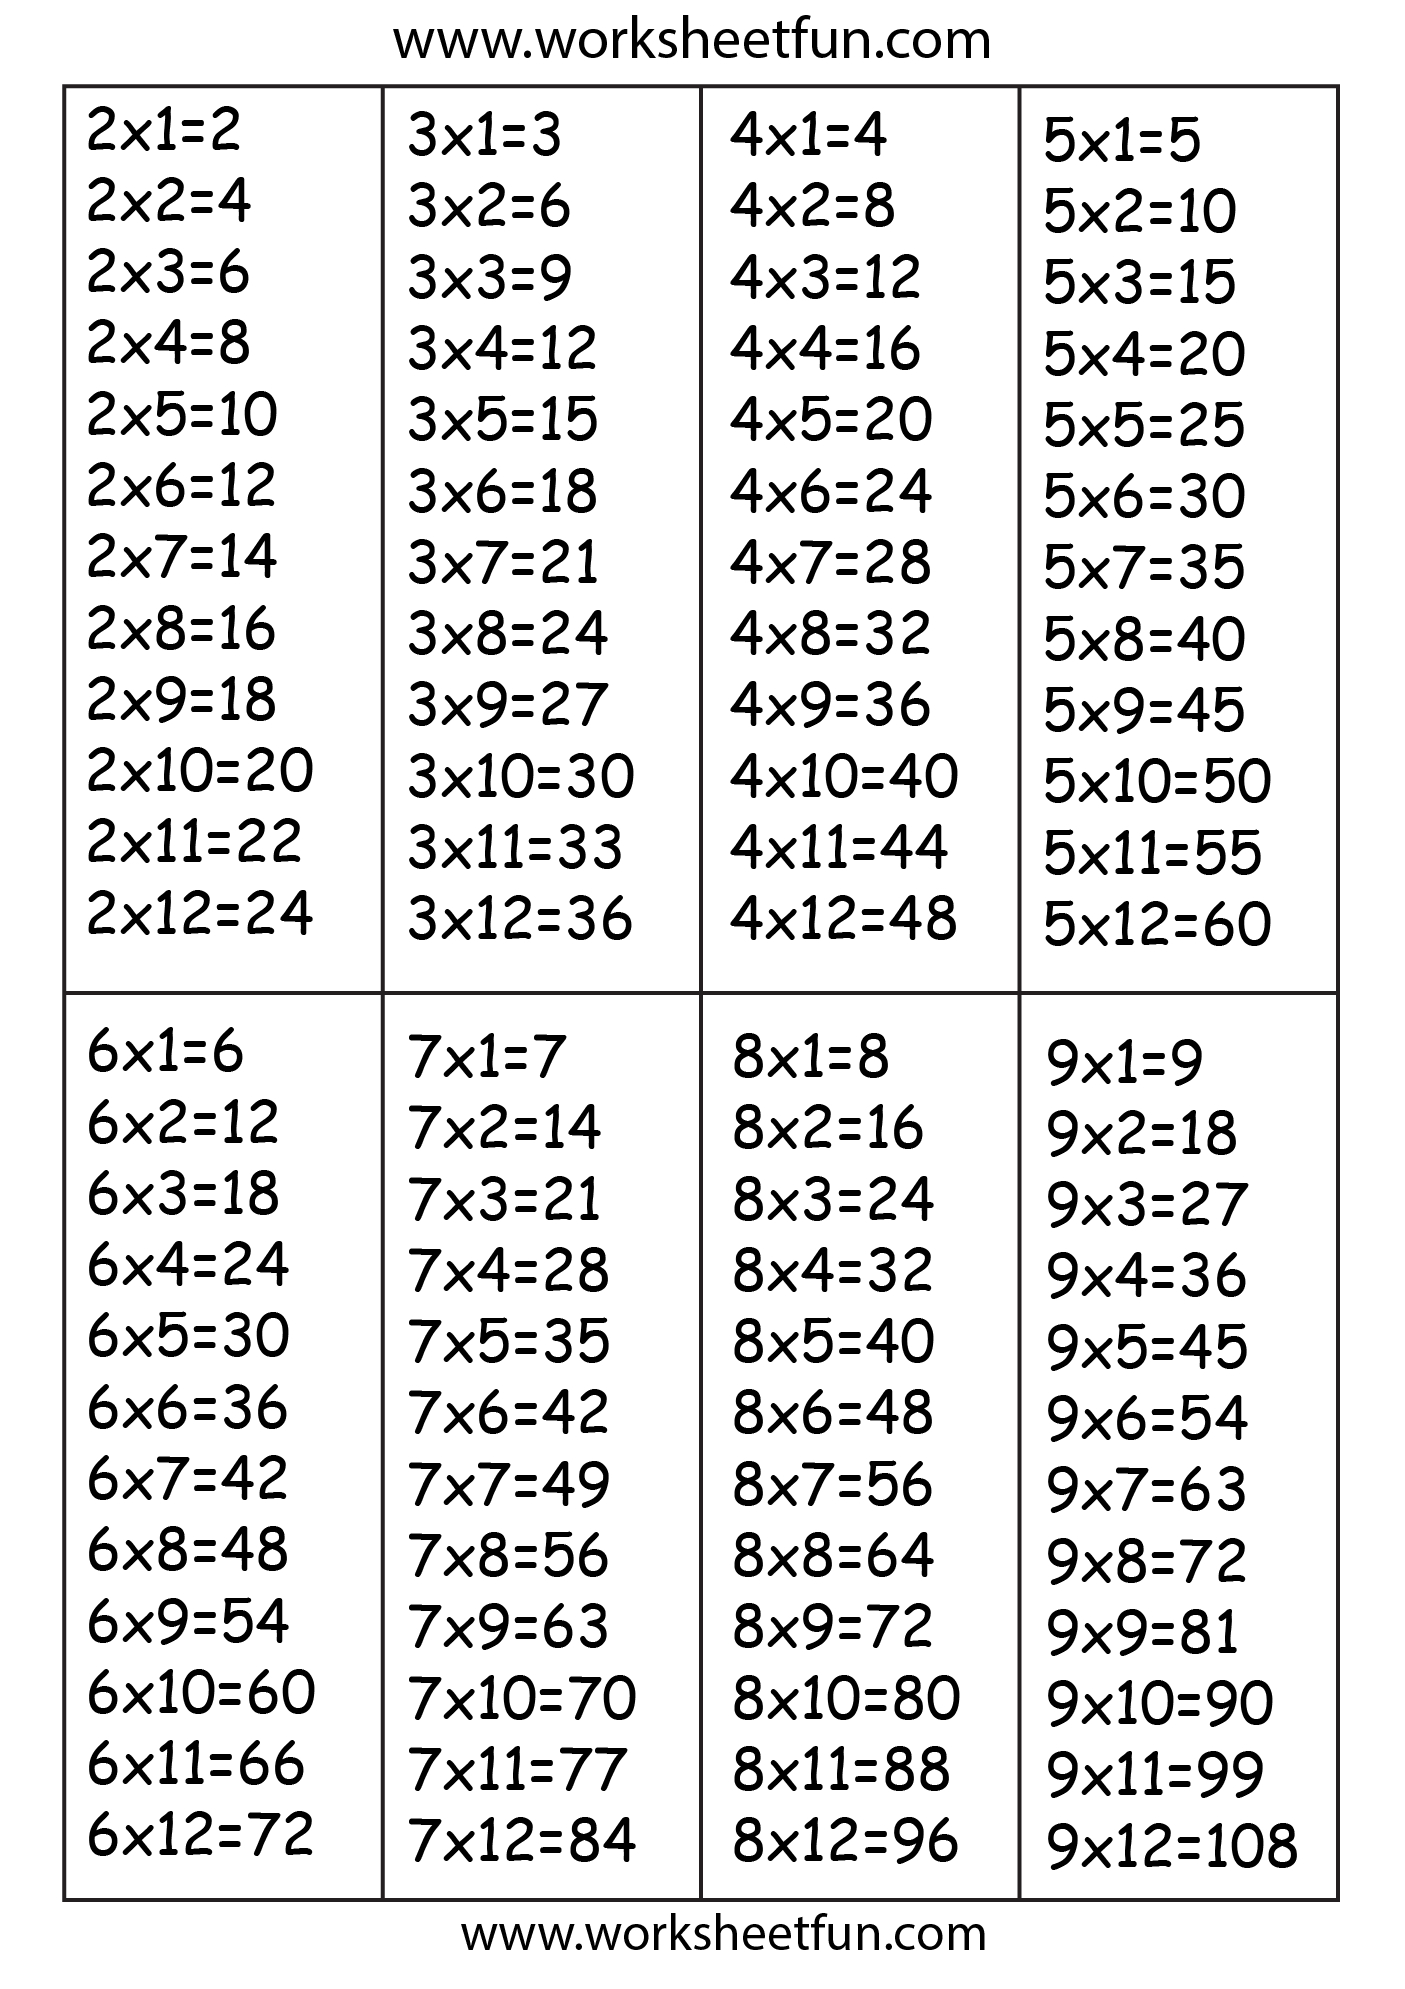 Times Table Chart – 2, 3, 4, 5, 6, 7, 8 &amp;amp; 9 / Free Printable within Printable Multiplication Table 1-9